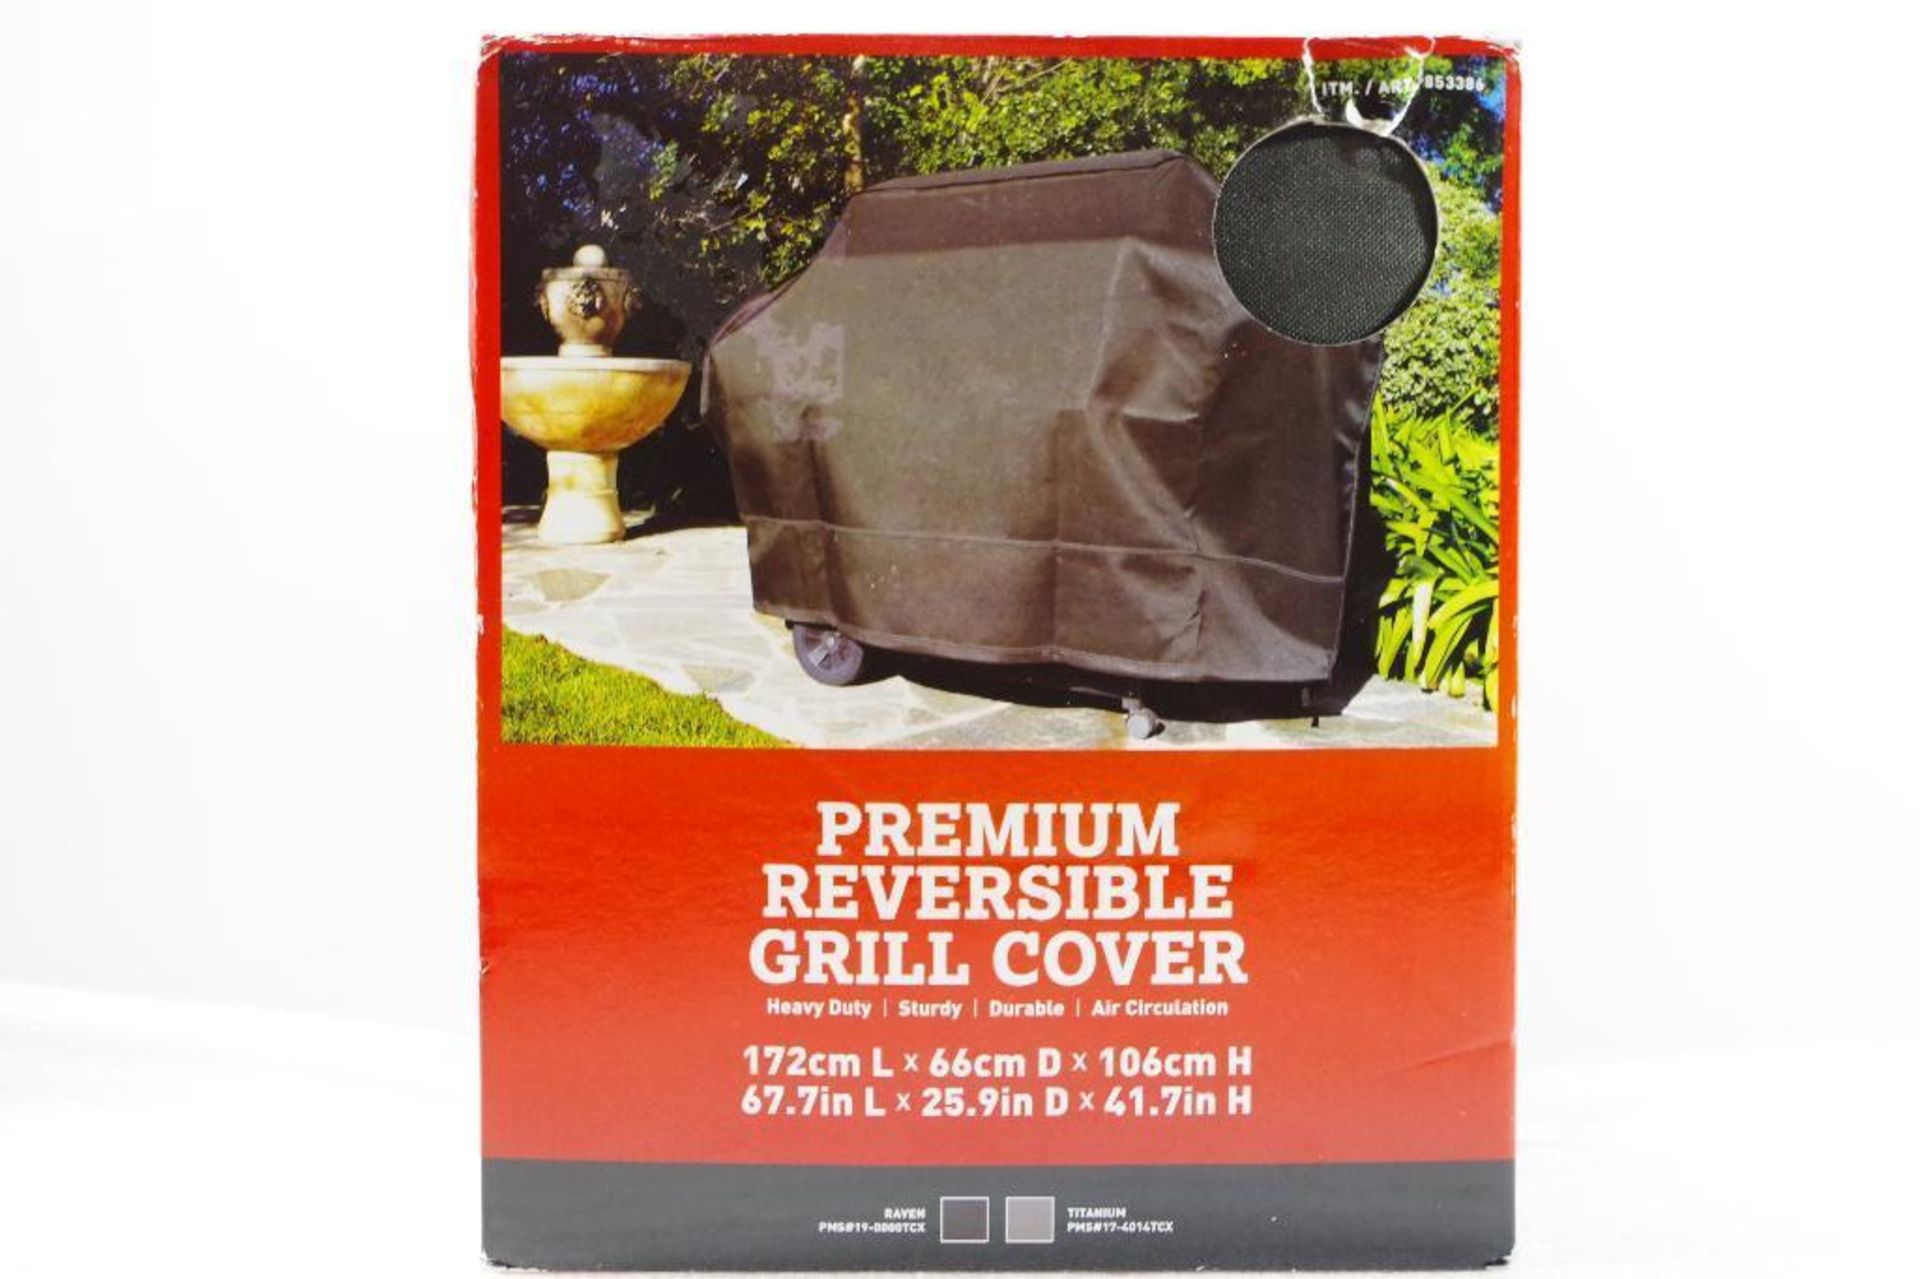 NEW Premium Reversible Grill Cover - Image 2 of 2